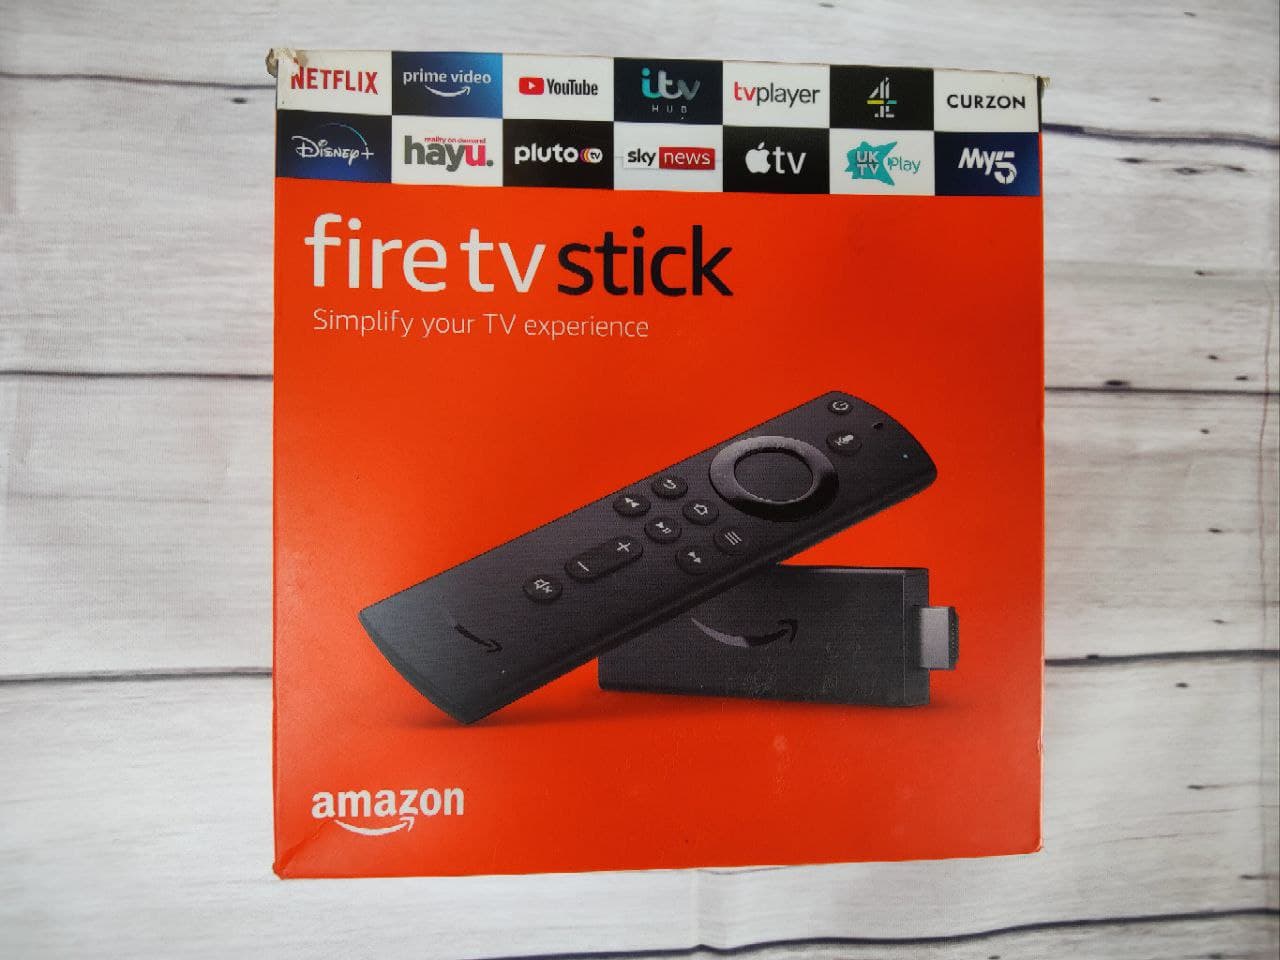 s new Fire TV Stick 4K Max: What to know